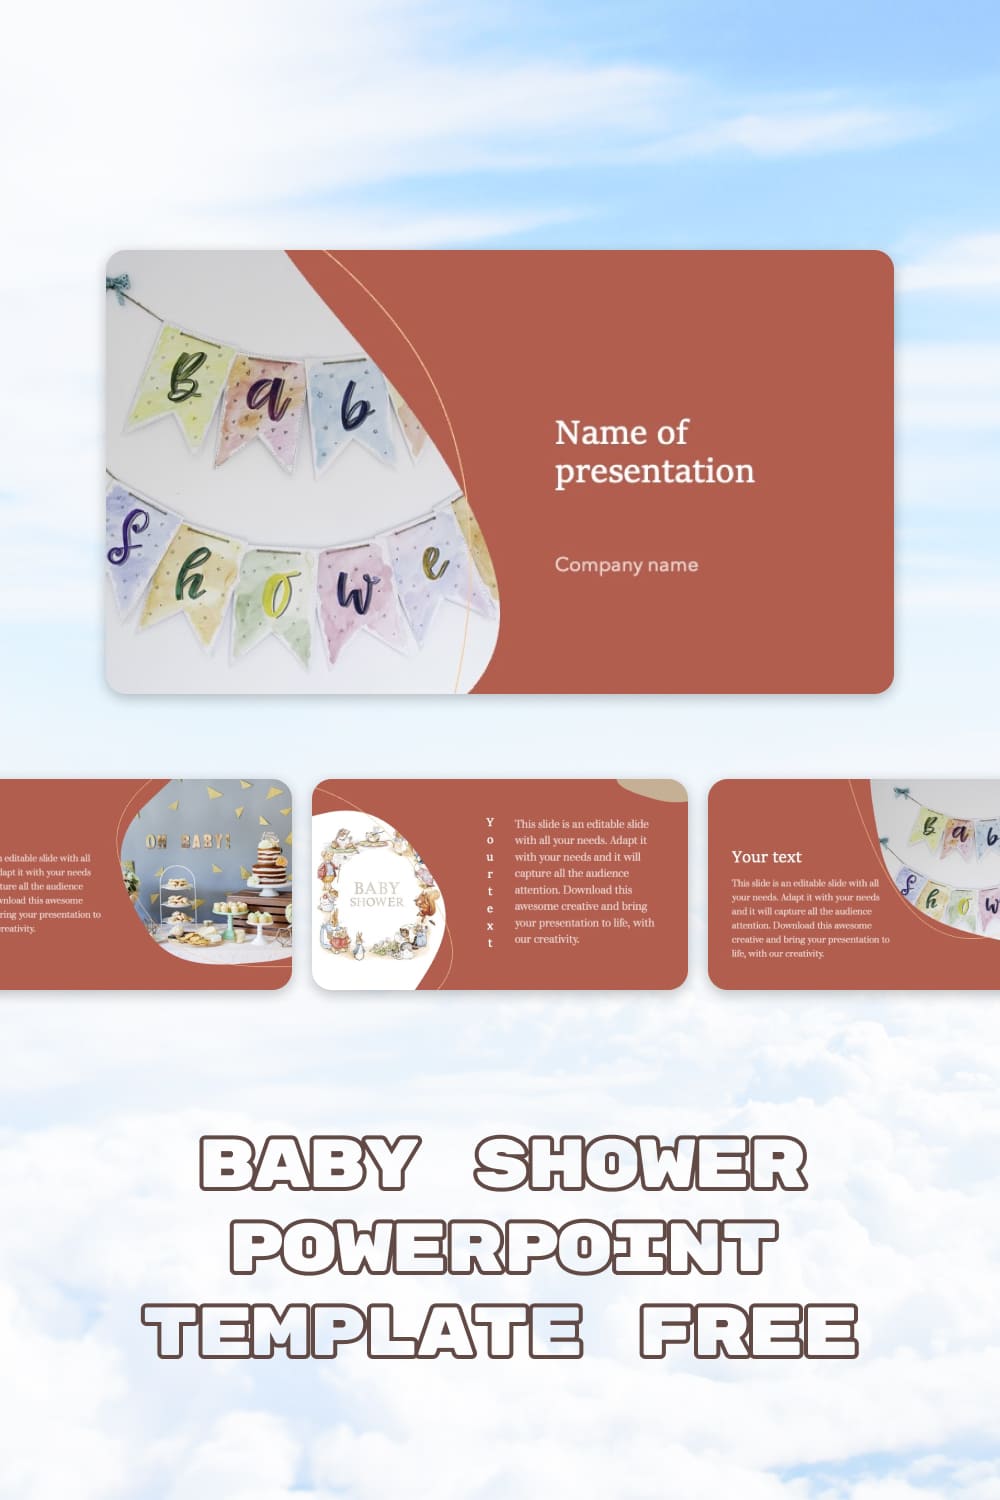 Pinterest Baby Shower Powerpoint Template Free.